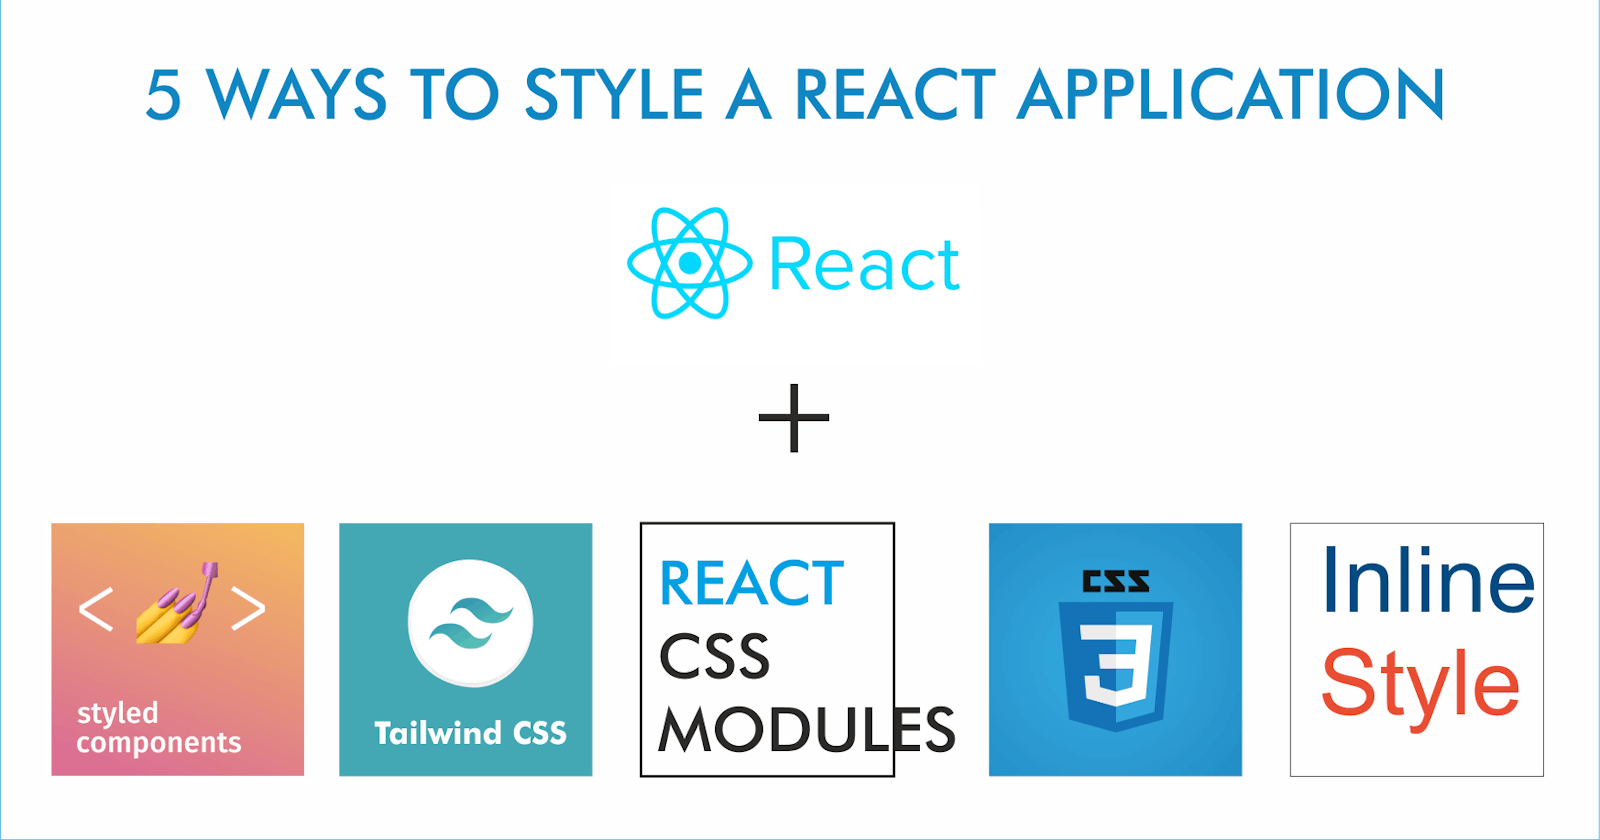 5 Ways To Style Your React Application